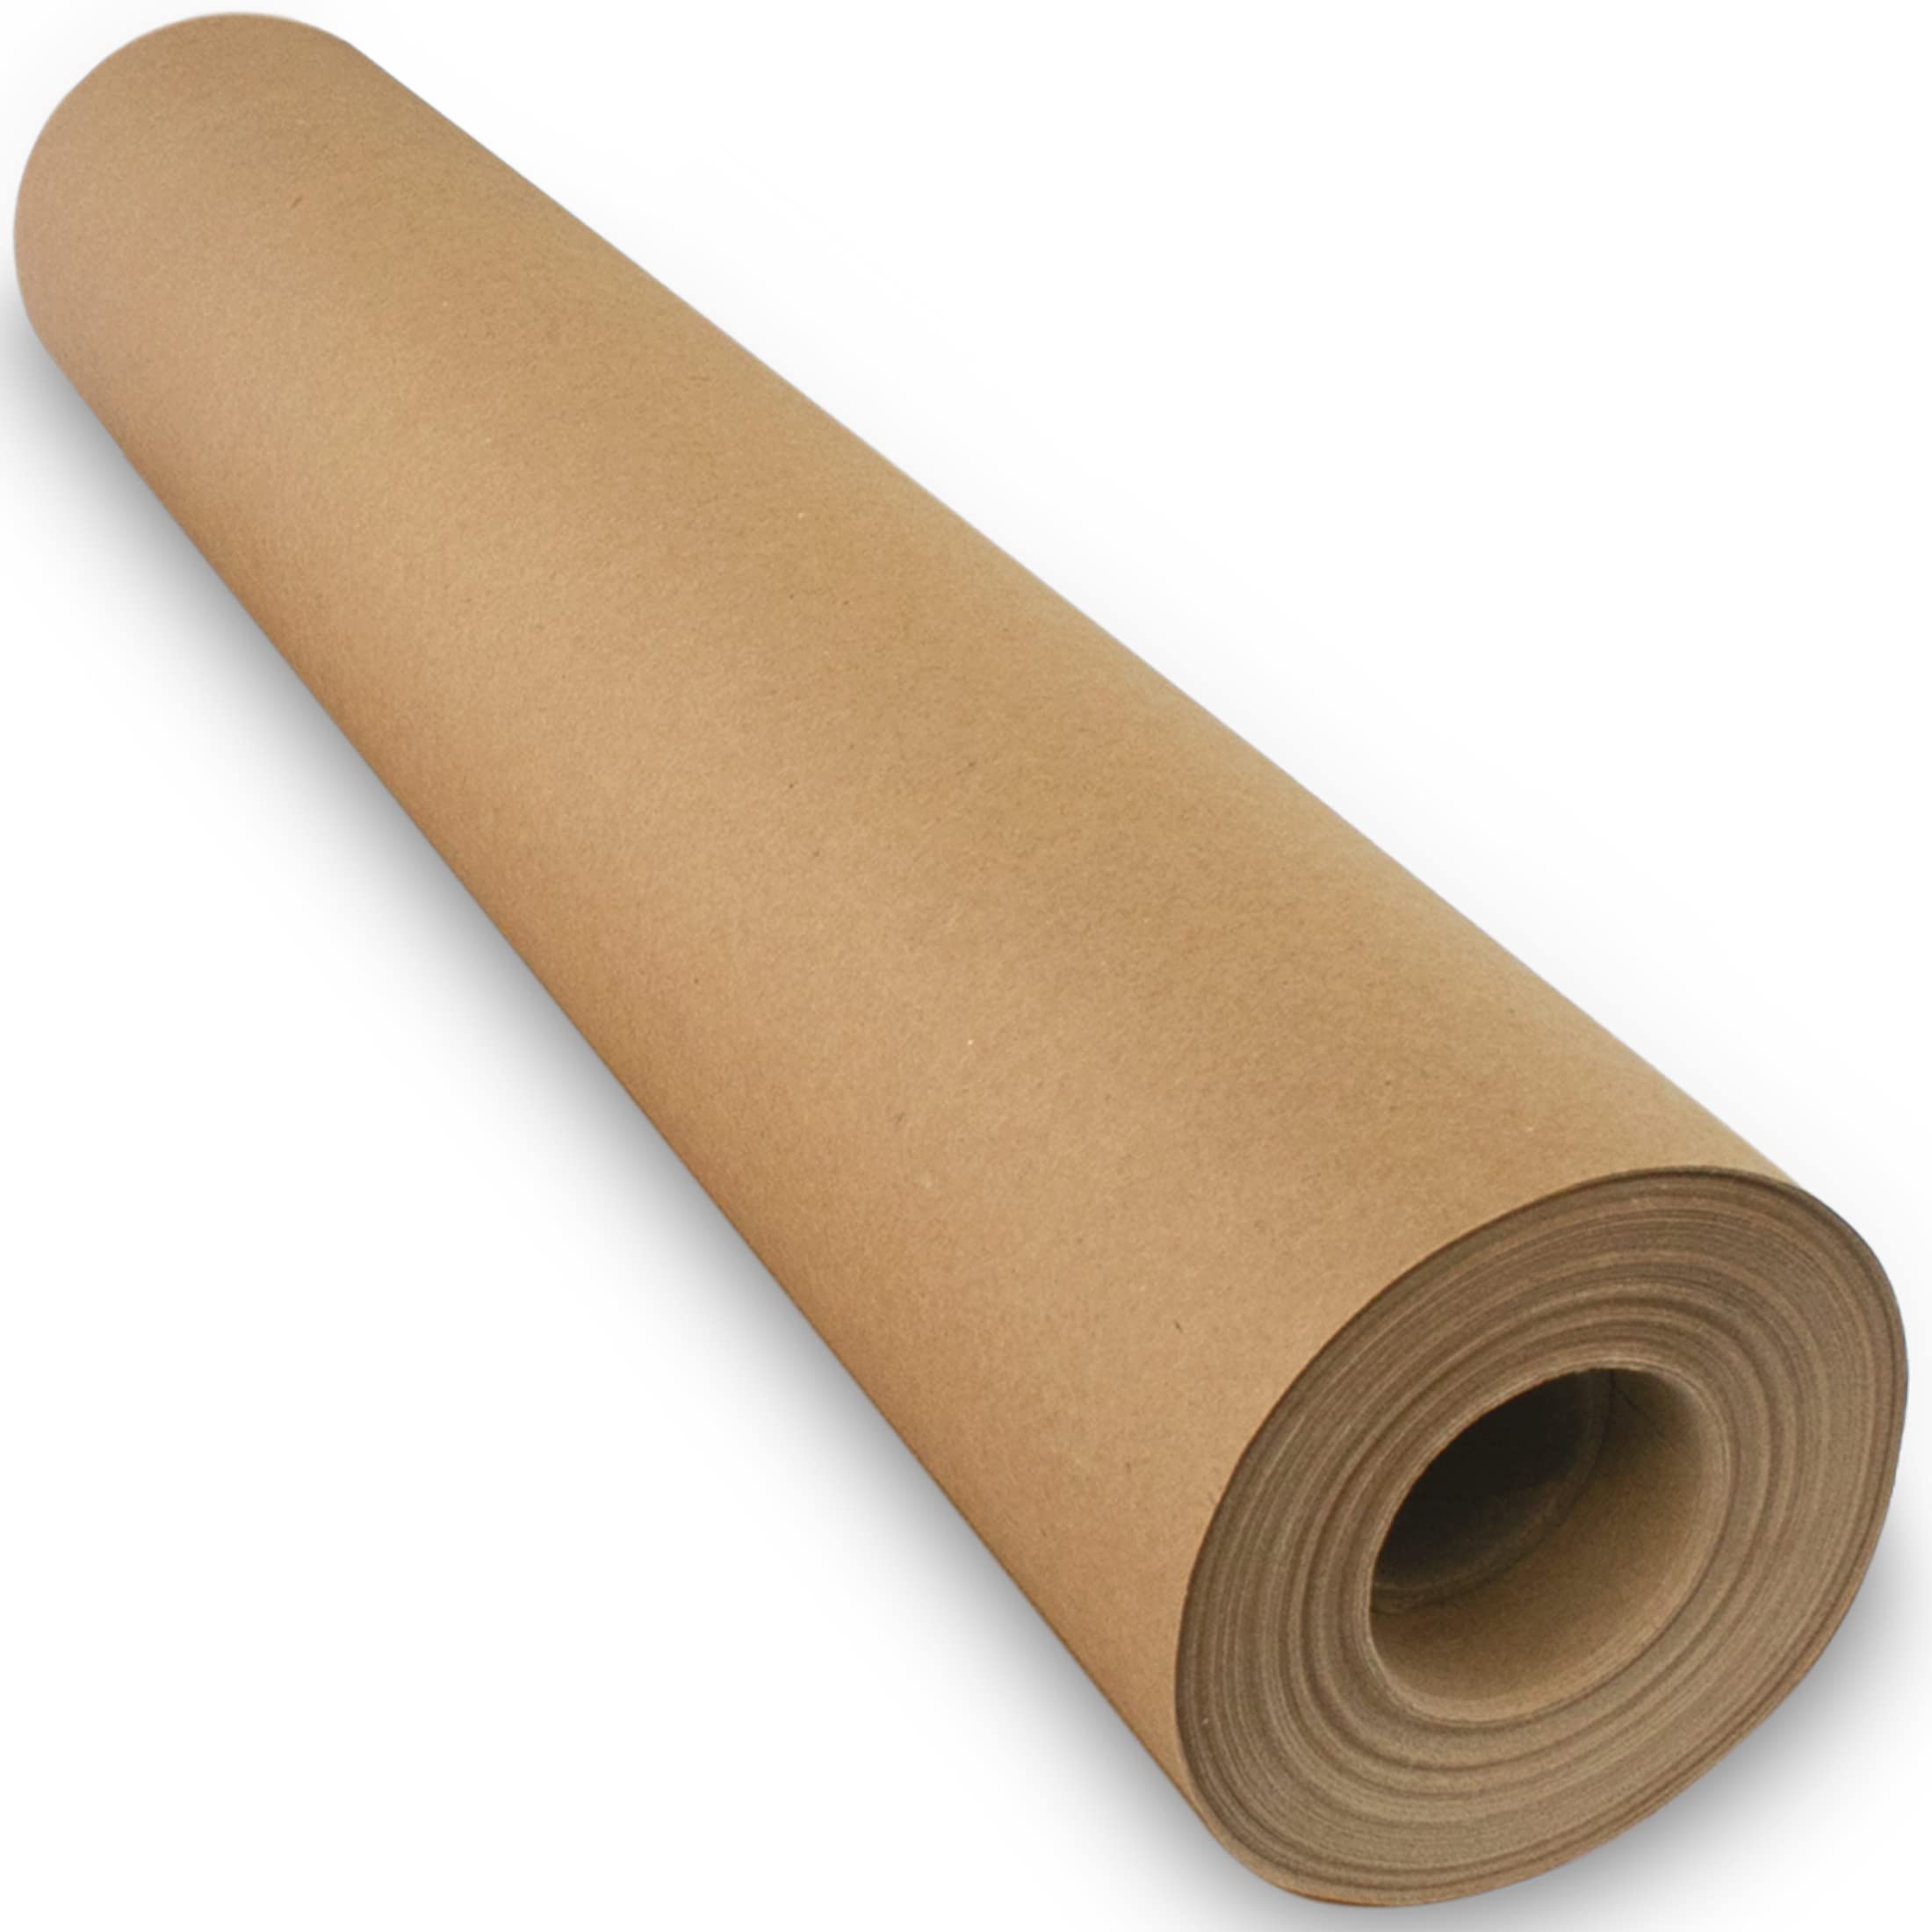 Brown Kraft Paper Roll 17.5 in x 1320 in (110 ft) Made in The USA - Brown Paper  Roll - Brown Wrapping Paper Roll - Brown Craft Paper Roll - Roll of Paper -  Kraft Wrapping Paper, Shipping Paper